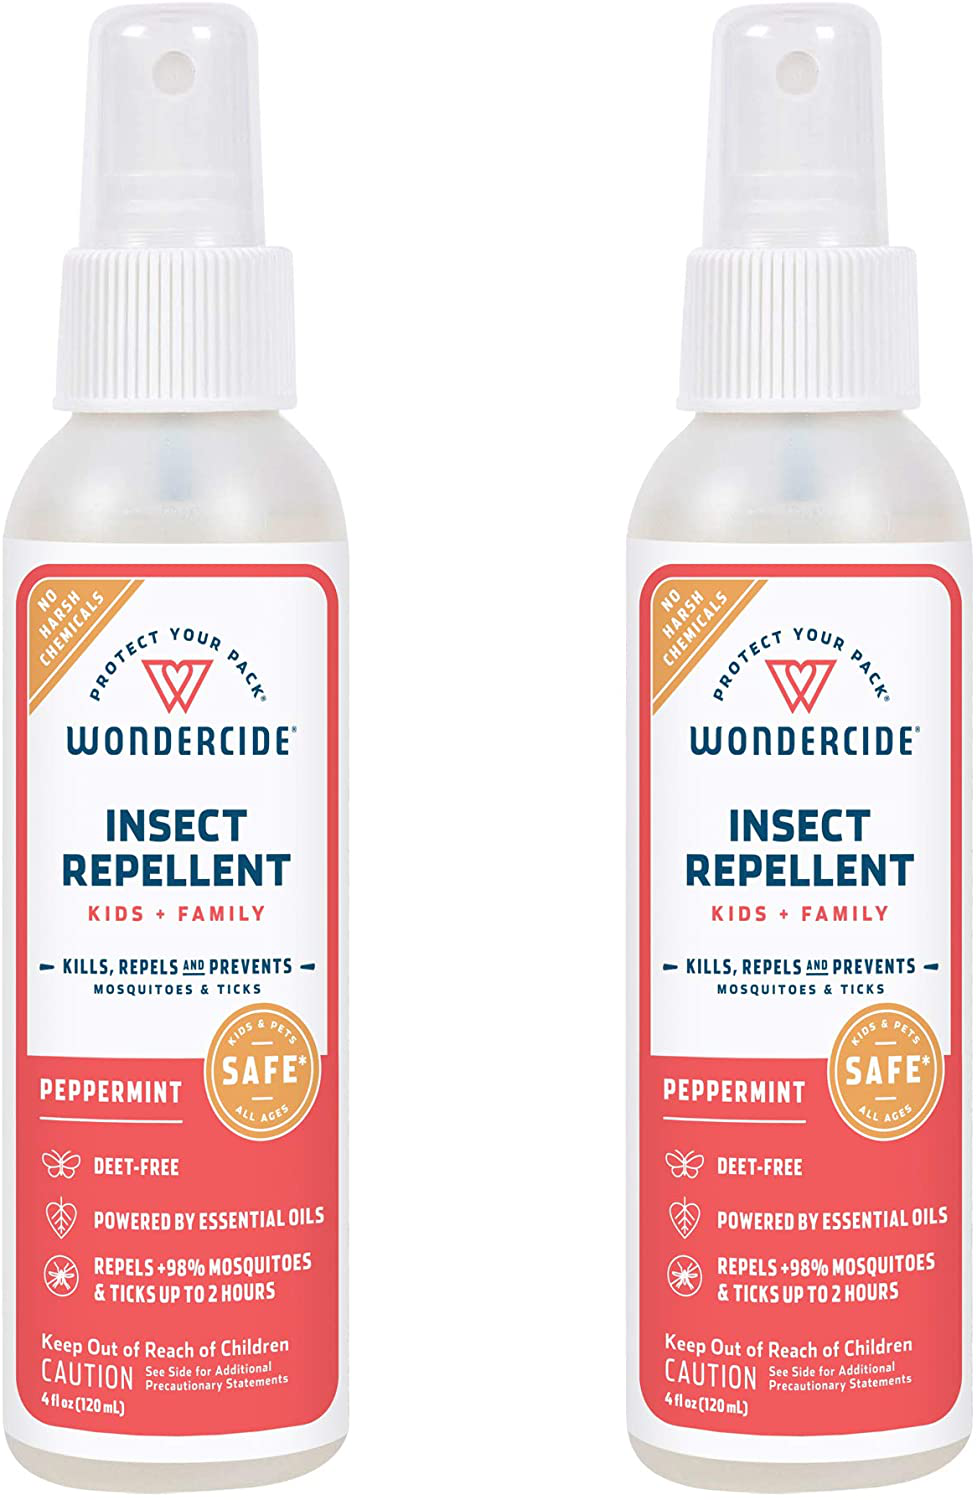 Wondercide - Mosquito, Tick, Fly, and Insect Repellent with Natural Essential Oils - DEET-Free Plant-Based Bug Spray and Killer - Safe for Kids, Babies, and Family - Peppermint 2-Pack of 4 oz Bottle